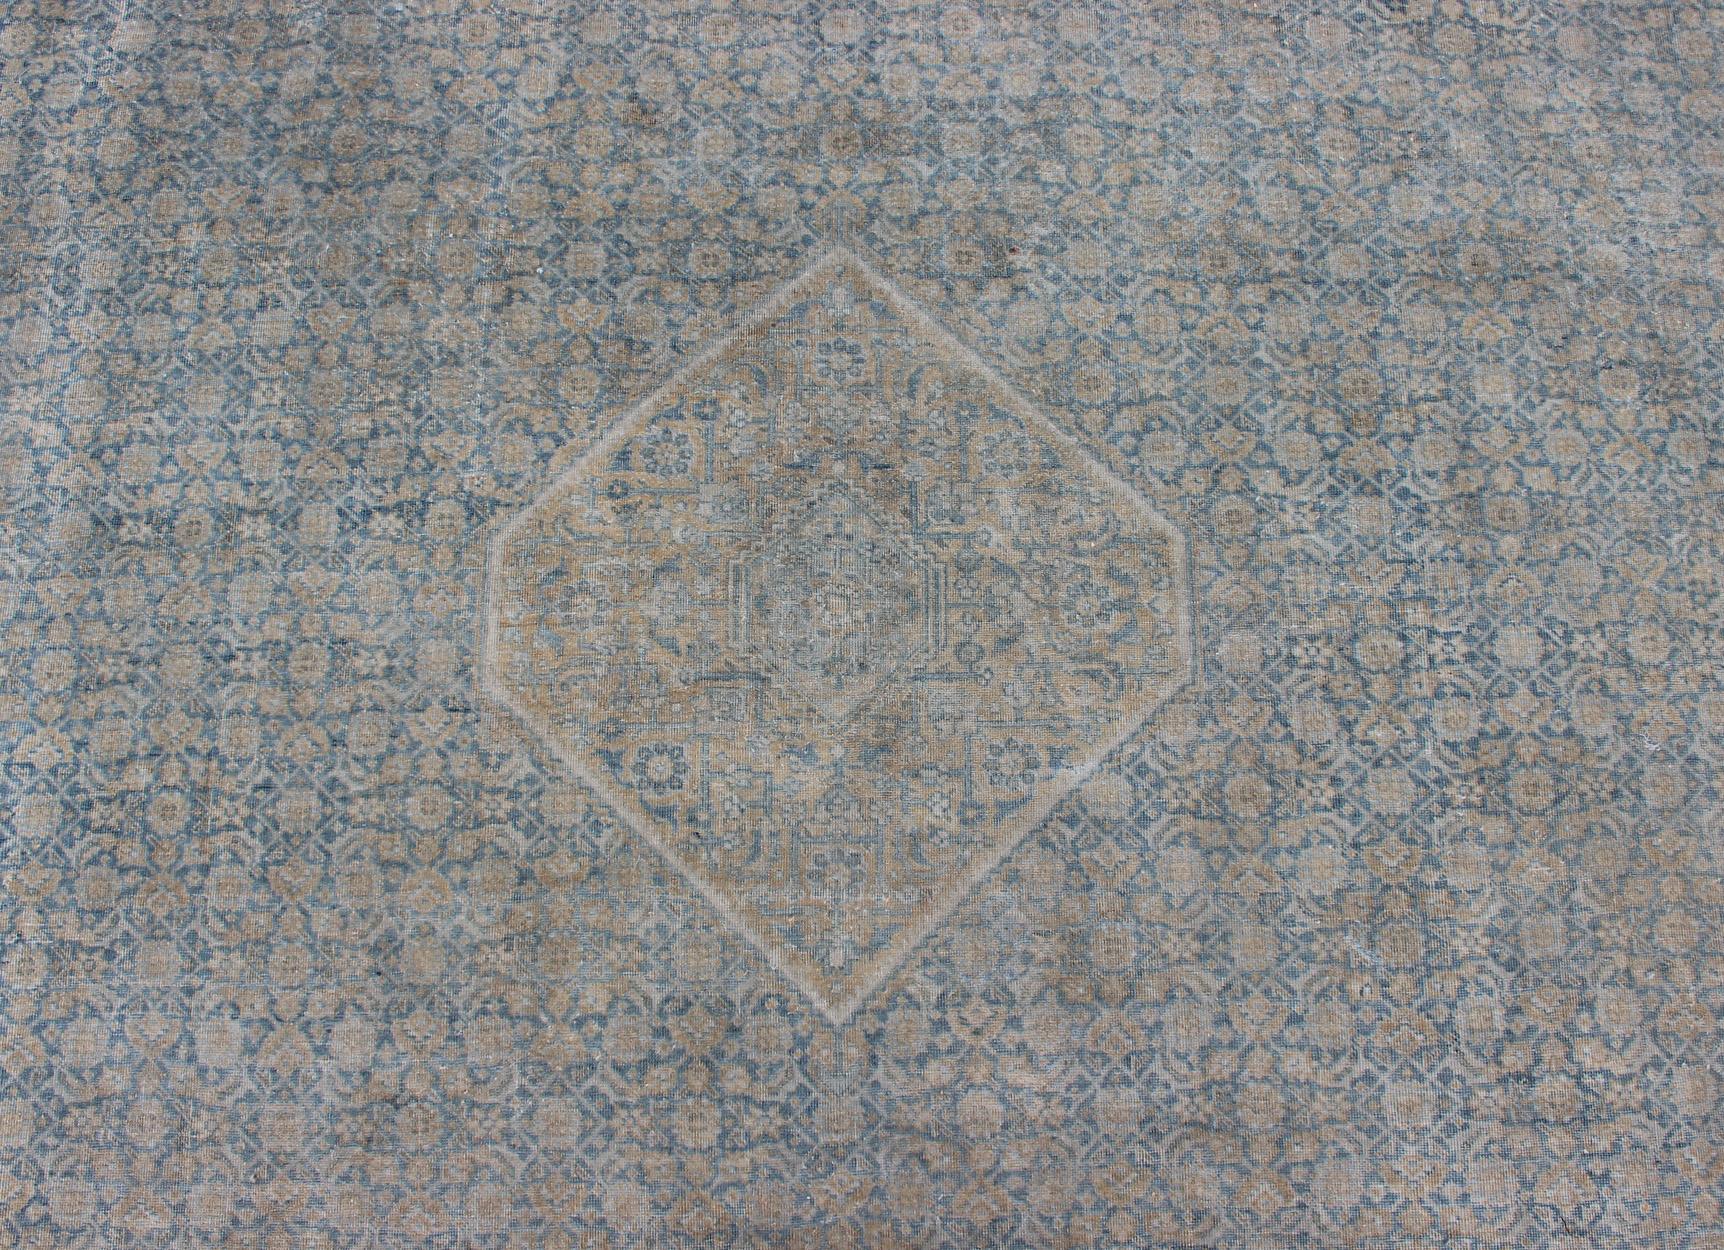 Large Antique Persian Tabriz Rug in All-Over Herati in Shades of Blue and Tan  In Good Condition For Sale In Atlanta, GA